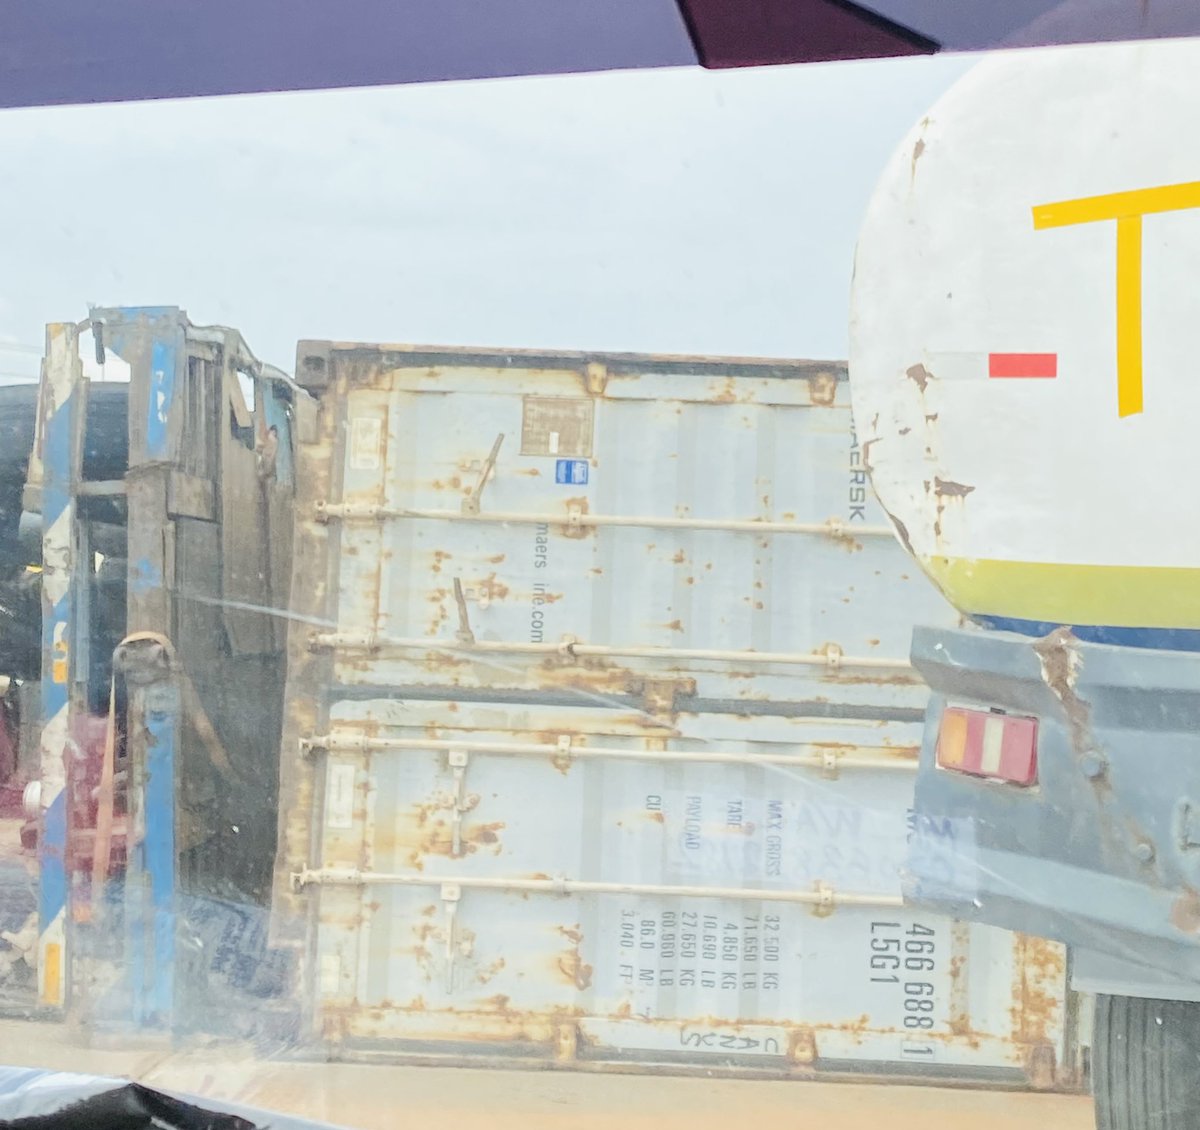 A Container truck has fallen off on the road along inward Shagamu-Lagos Expressway causing a moving traffic. 

Some Traffic Policemen and FRSC Ogun state officers are on ground to prevent gridlock. 

Evacuation of the truck is also in progress. 

#TrafficReports